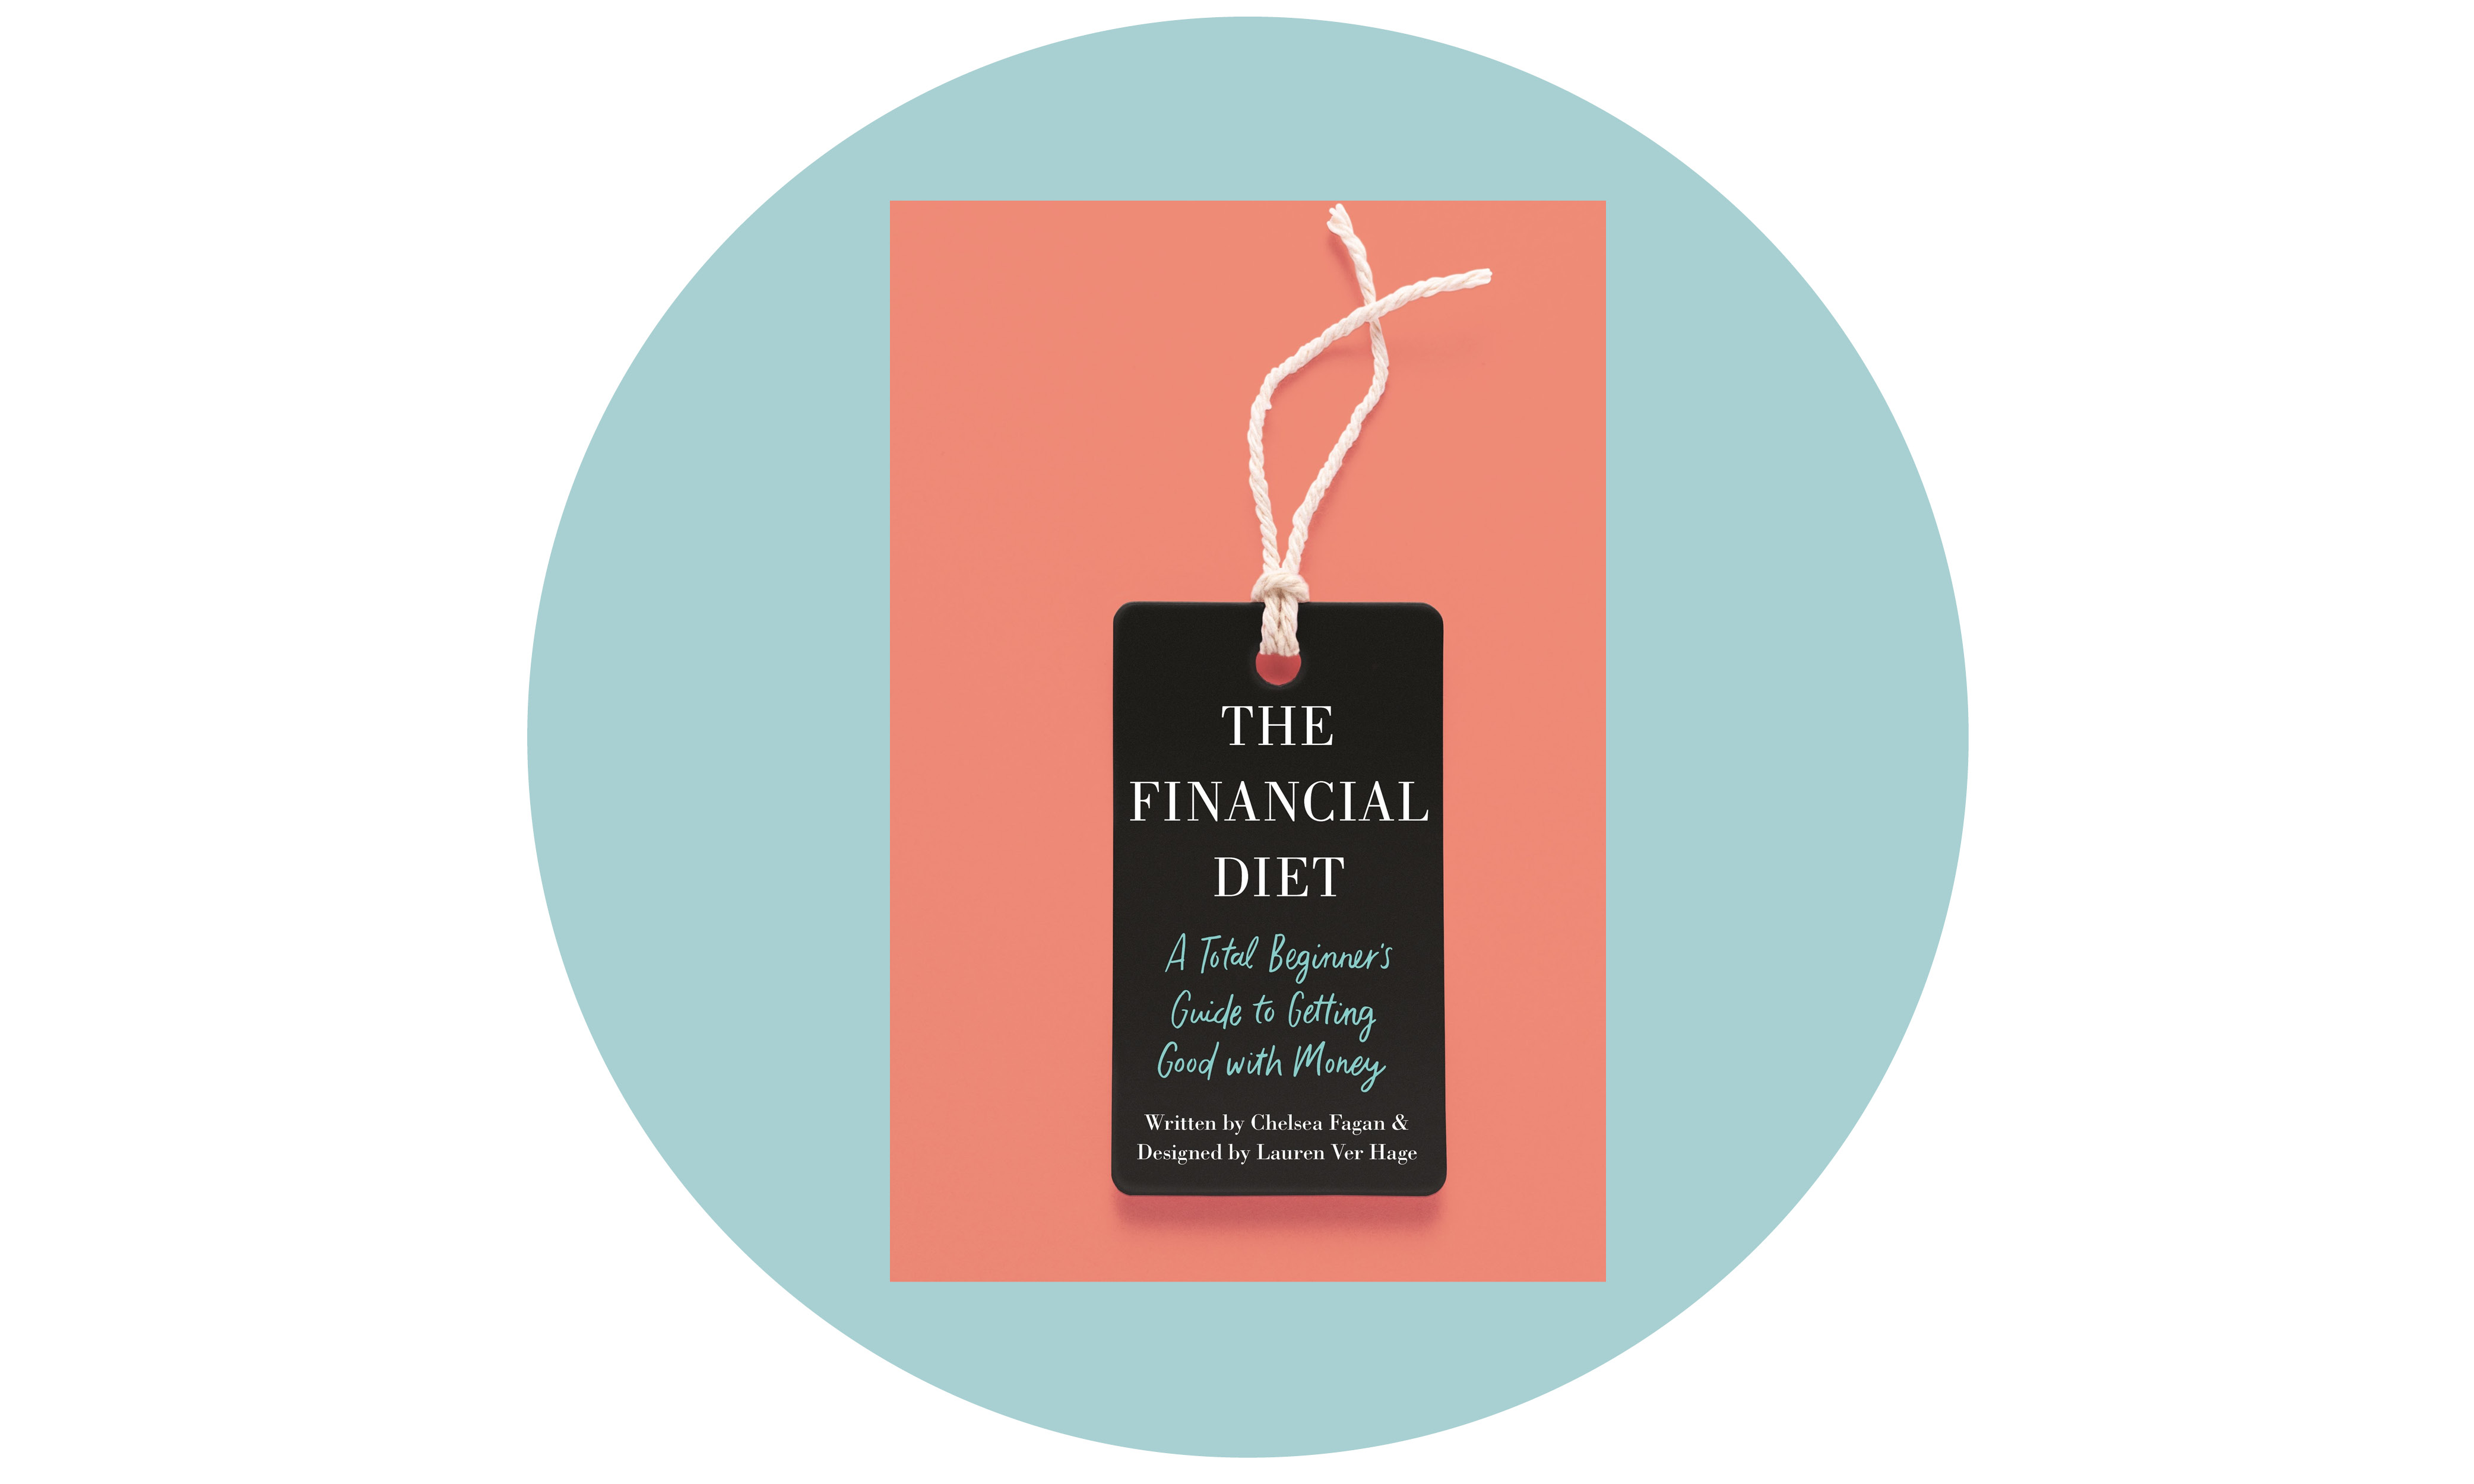 The Financial Diet: A Total Beginner’s Guide to Getting Good with Money by Chelsea Fagan (Henry Holt and Co., 2018) More Carrie than Miranda? Allow us to suggest a diet book of a different persuasion. From budgeting and investing to the awkward money-related conversations you need to have with your friends/family members/employers (and how to make these as un-awkward as possible), Chelsea Fagan’s accessibly written personal-finance bible could be the thing that someday saves you from your very own ‘$40,000 worth of shoes and facing eviction’ debacle. We couldn’t help but wonder, anyway.